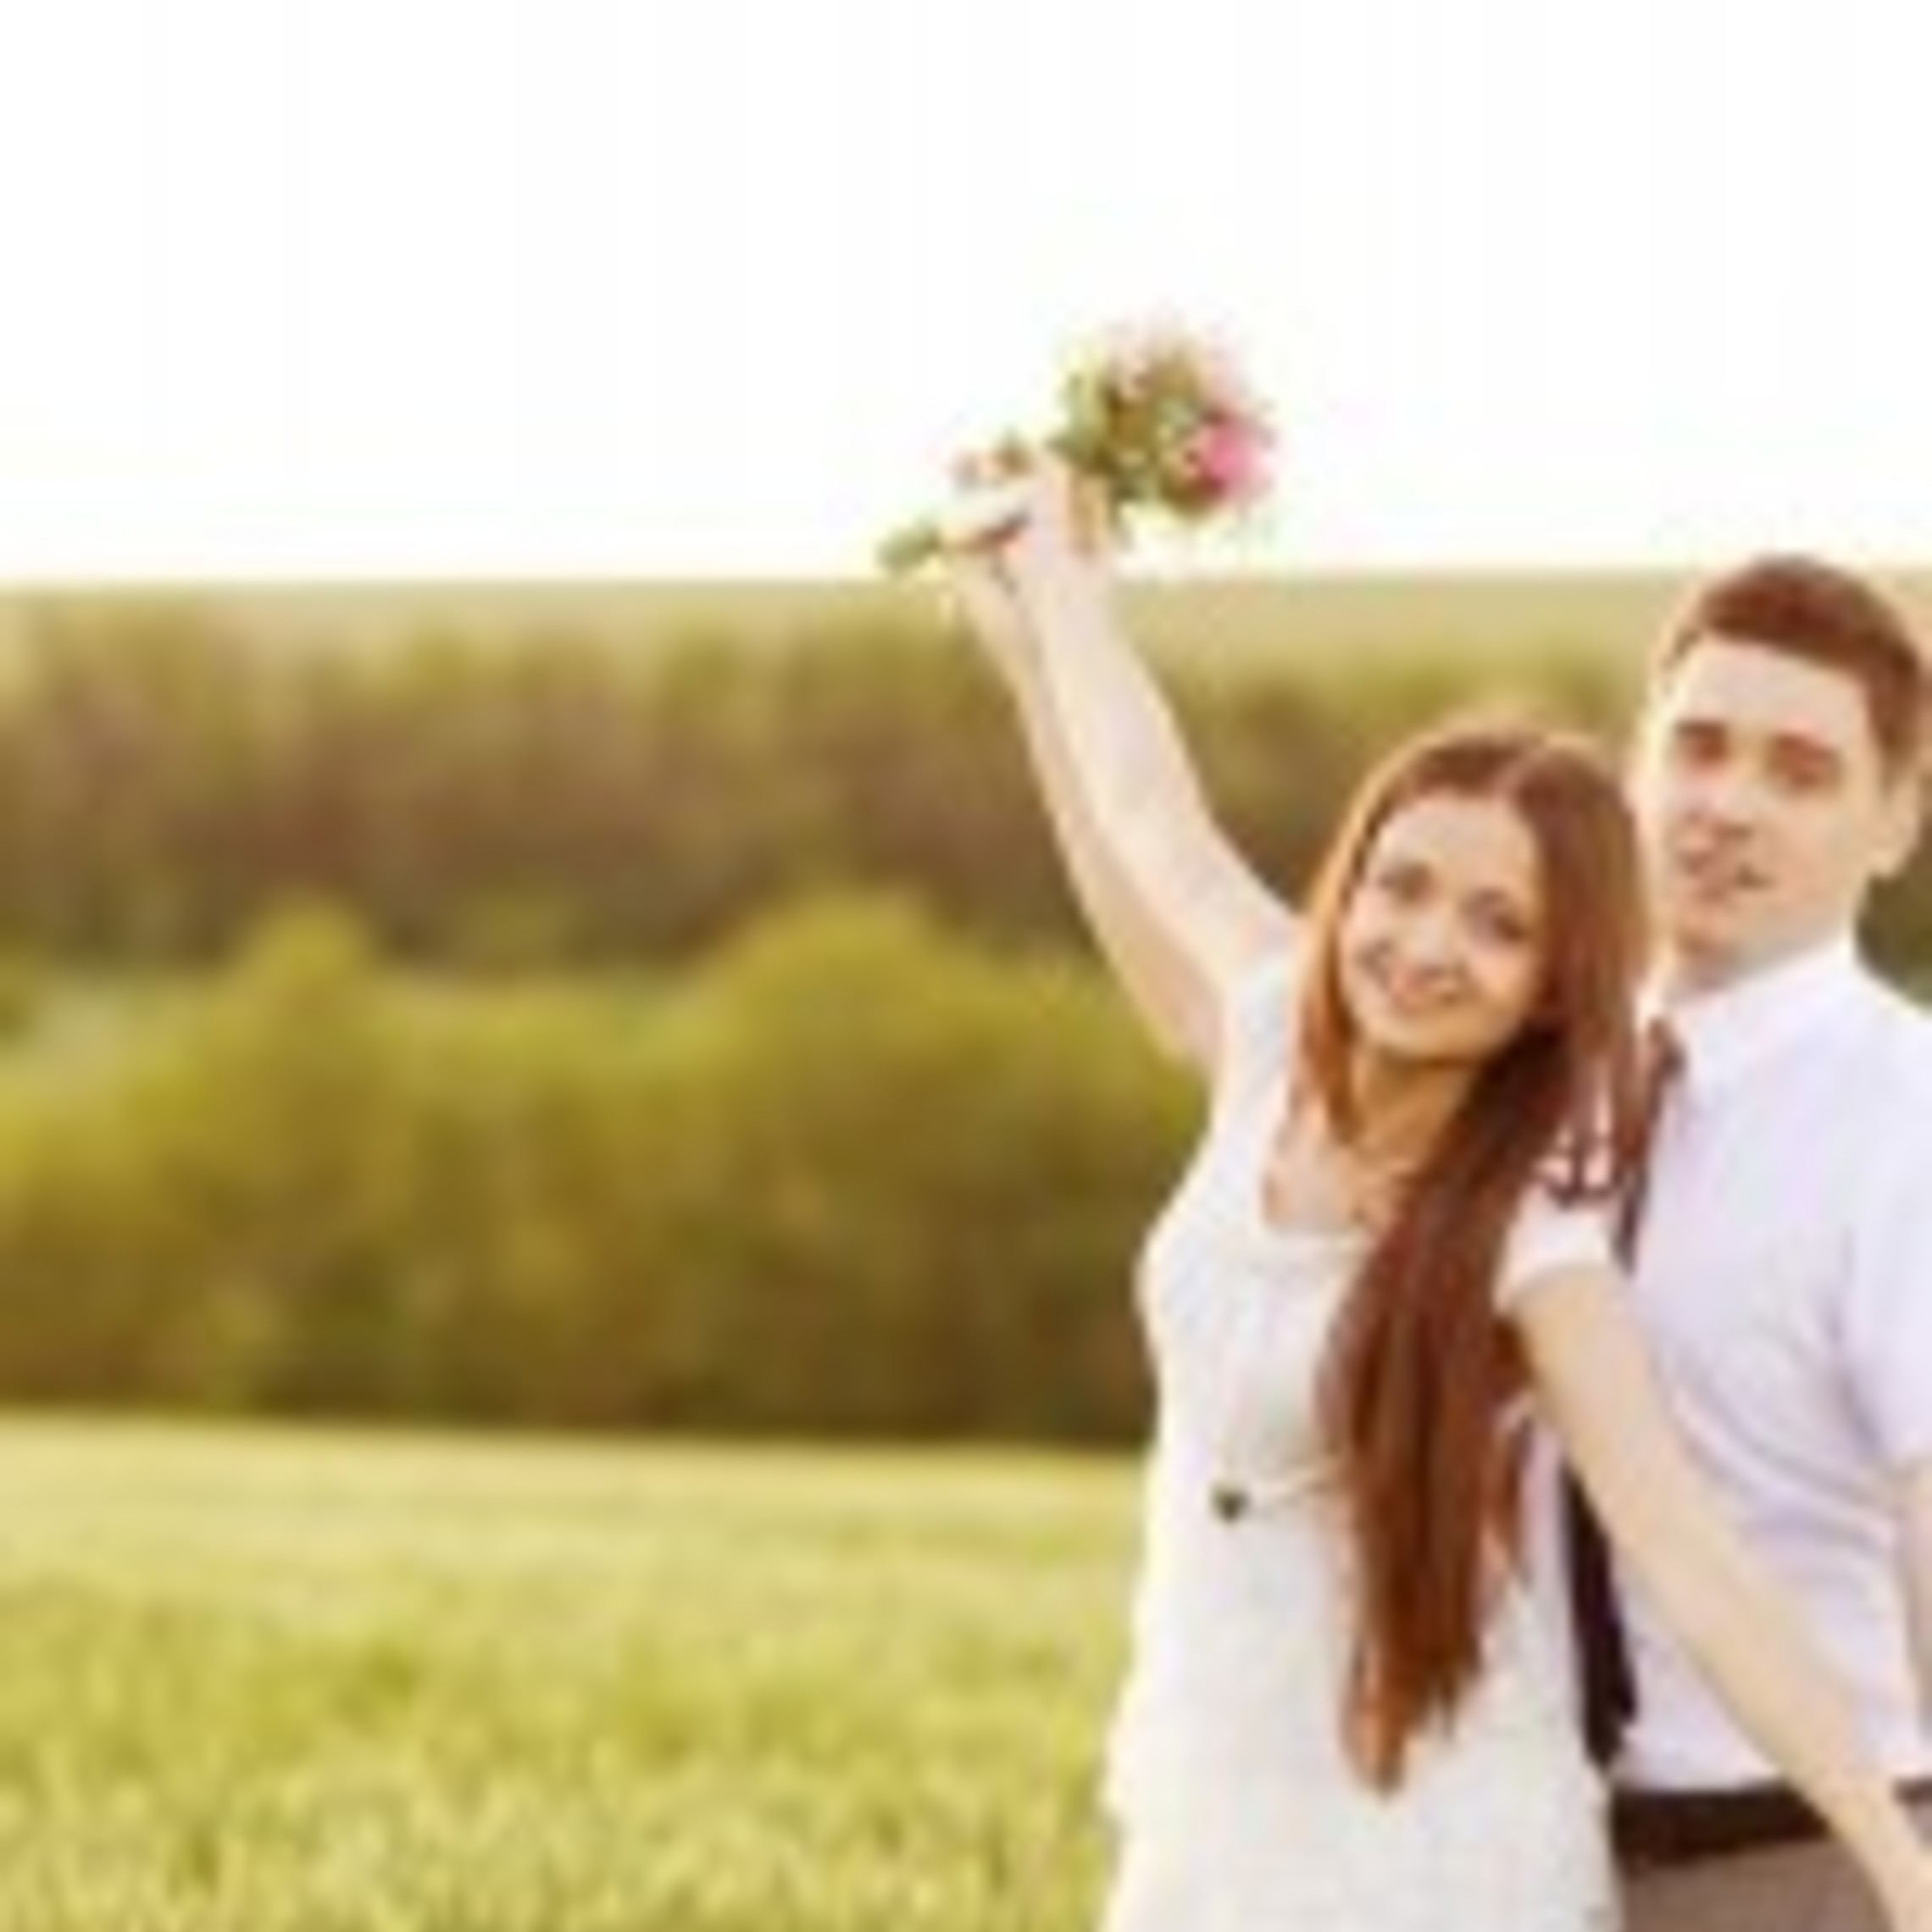 Young woman and her boyfriend pose happily